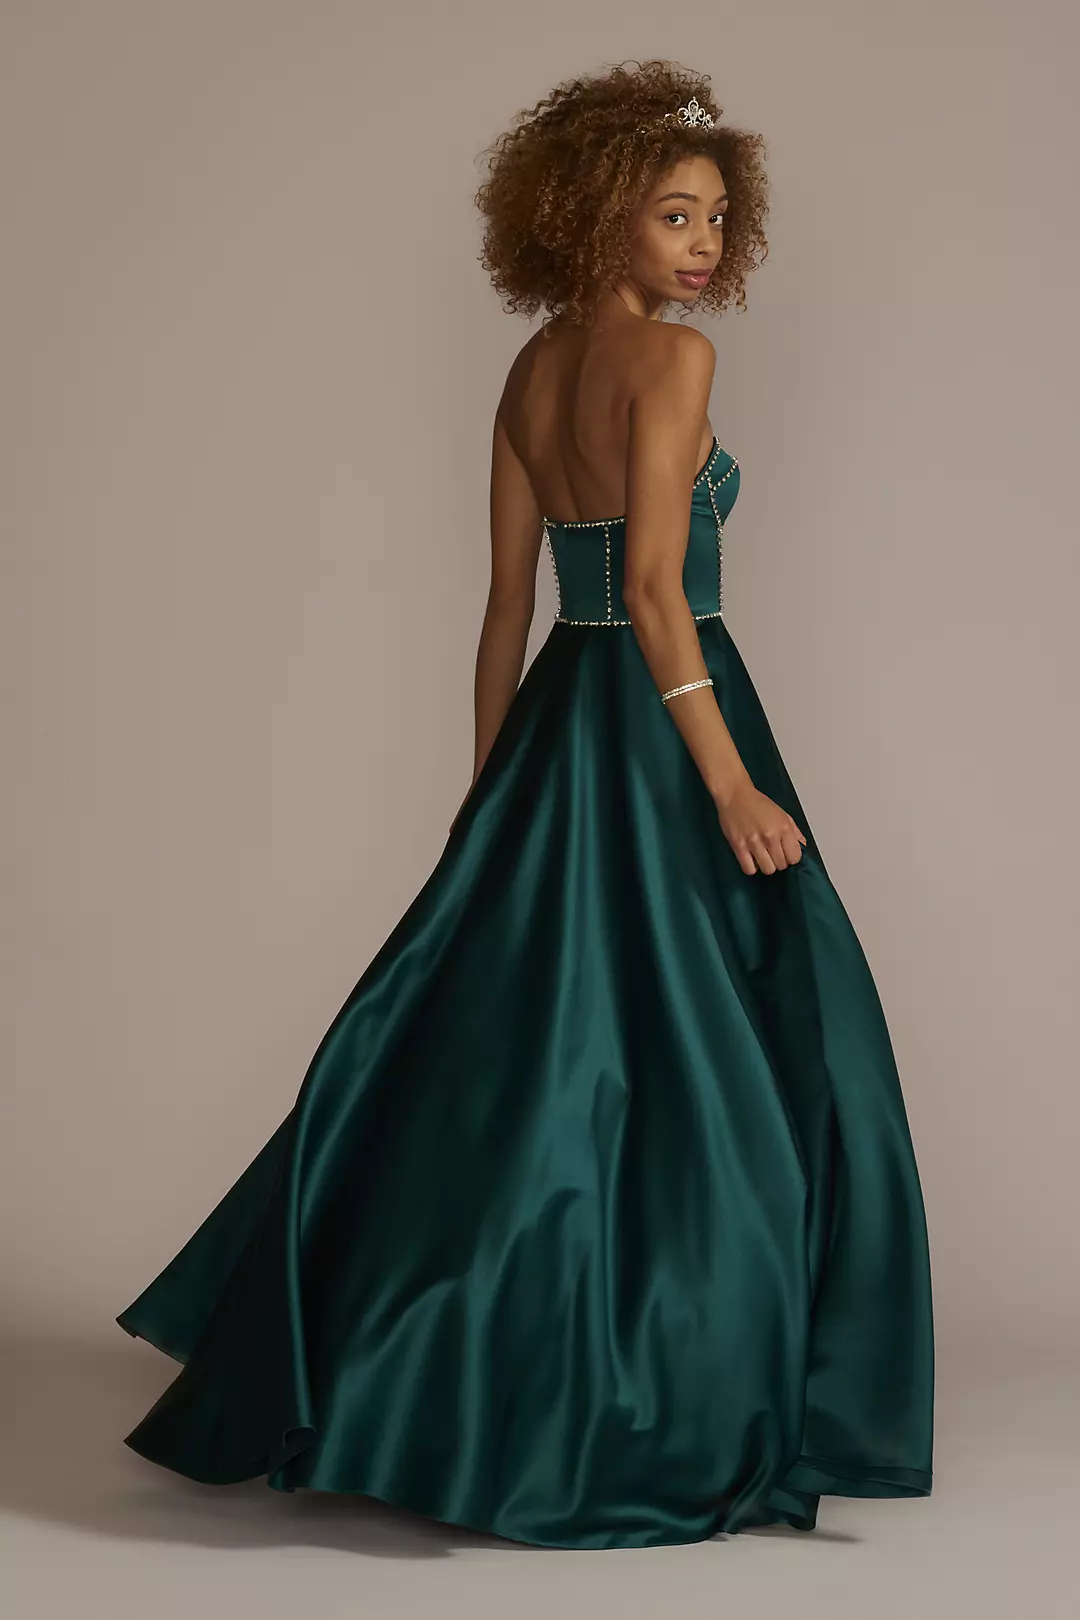 Satin Ball Gown with Jewel Embellished Bodice Image 2